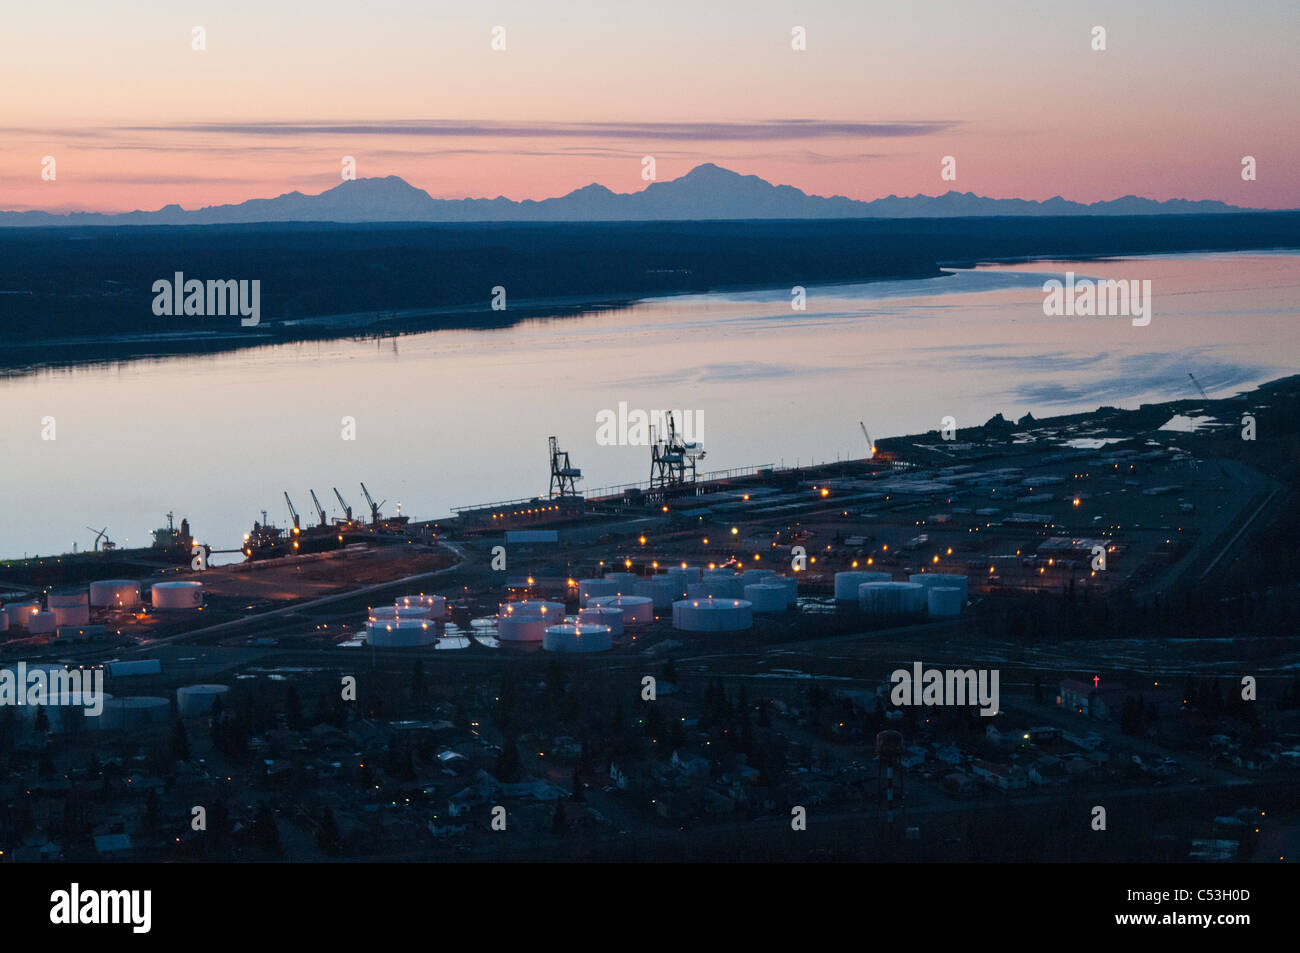 Aerial evening view of the Port of Anchorage with Mt. Foraker, Mt. Hunter and Mt. McKinley in the background, Alaska, Winter Stock Photo